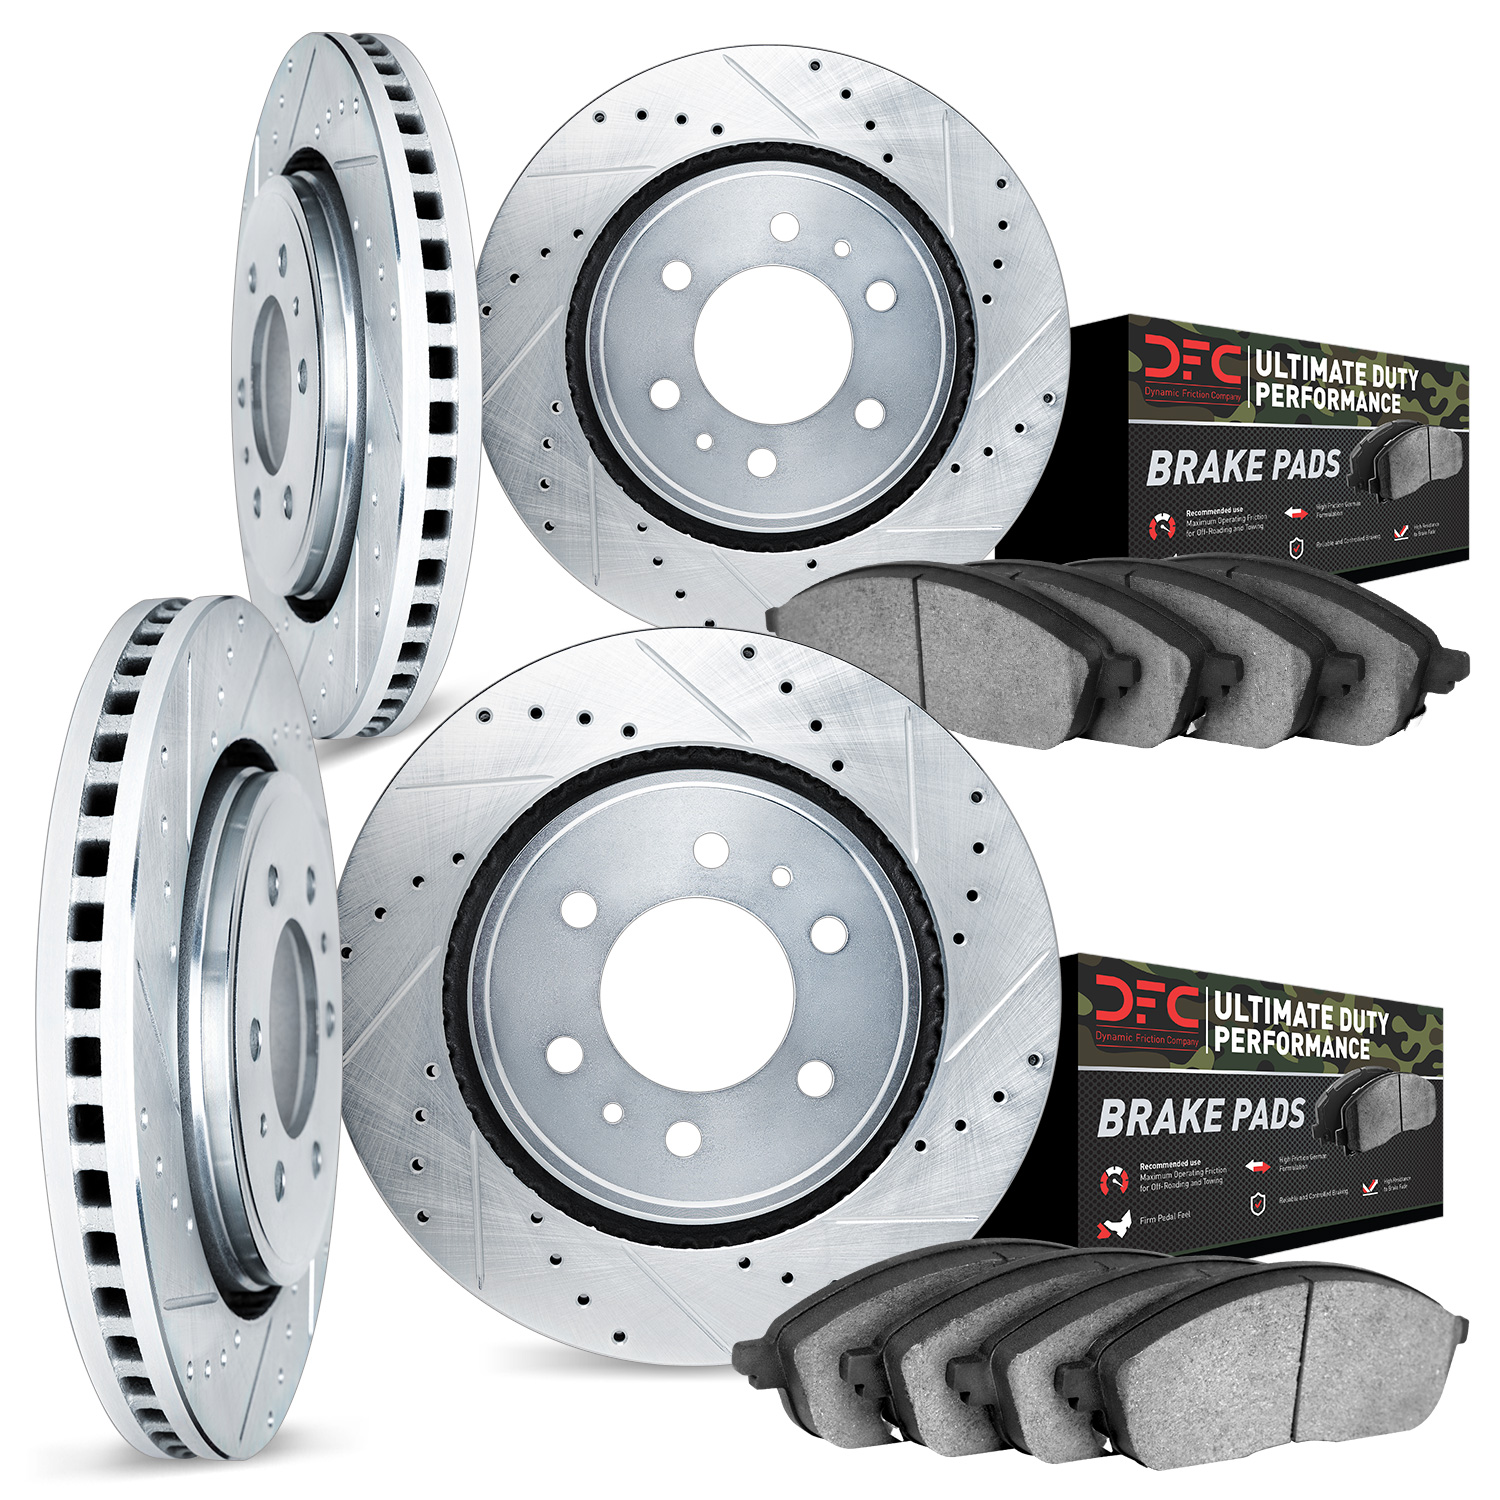 7404-48015 Drilled/Slotted Brake Rotors with Ultimate-Duty Brake Pads Kit [Silver], 2007-2014 GM, Position: Front and Rear